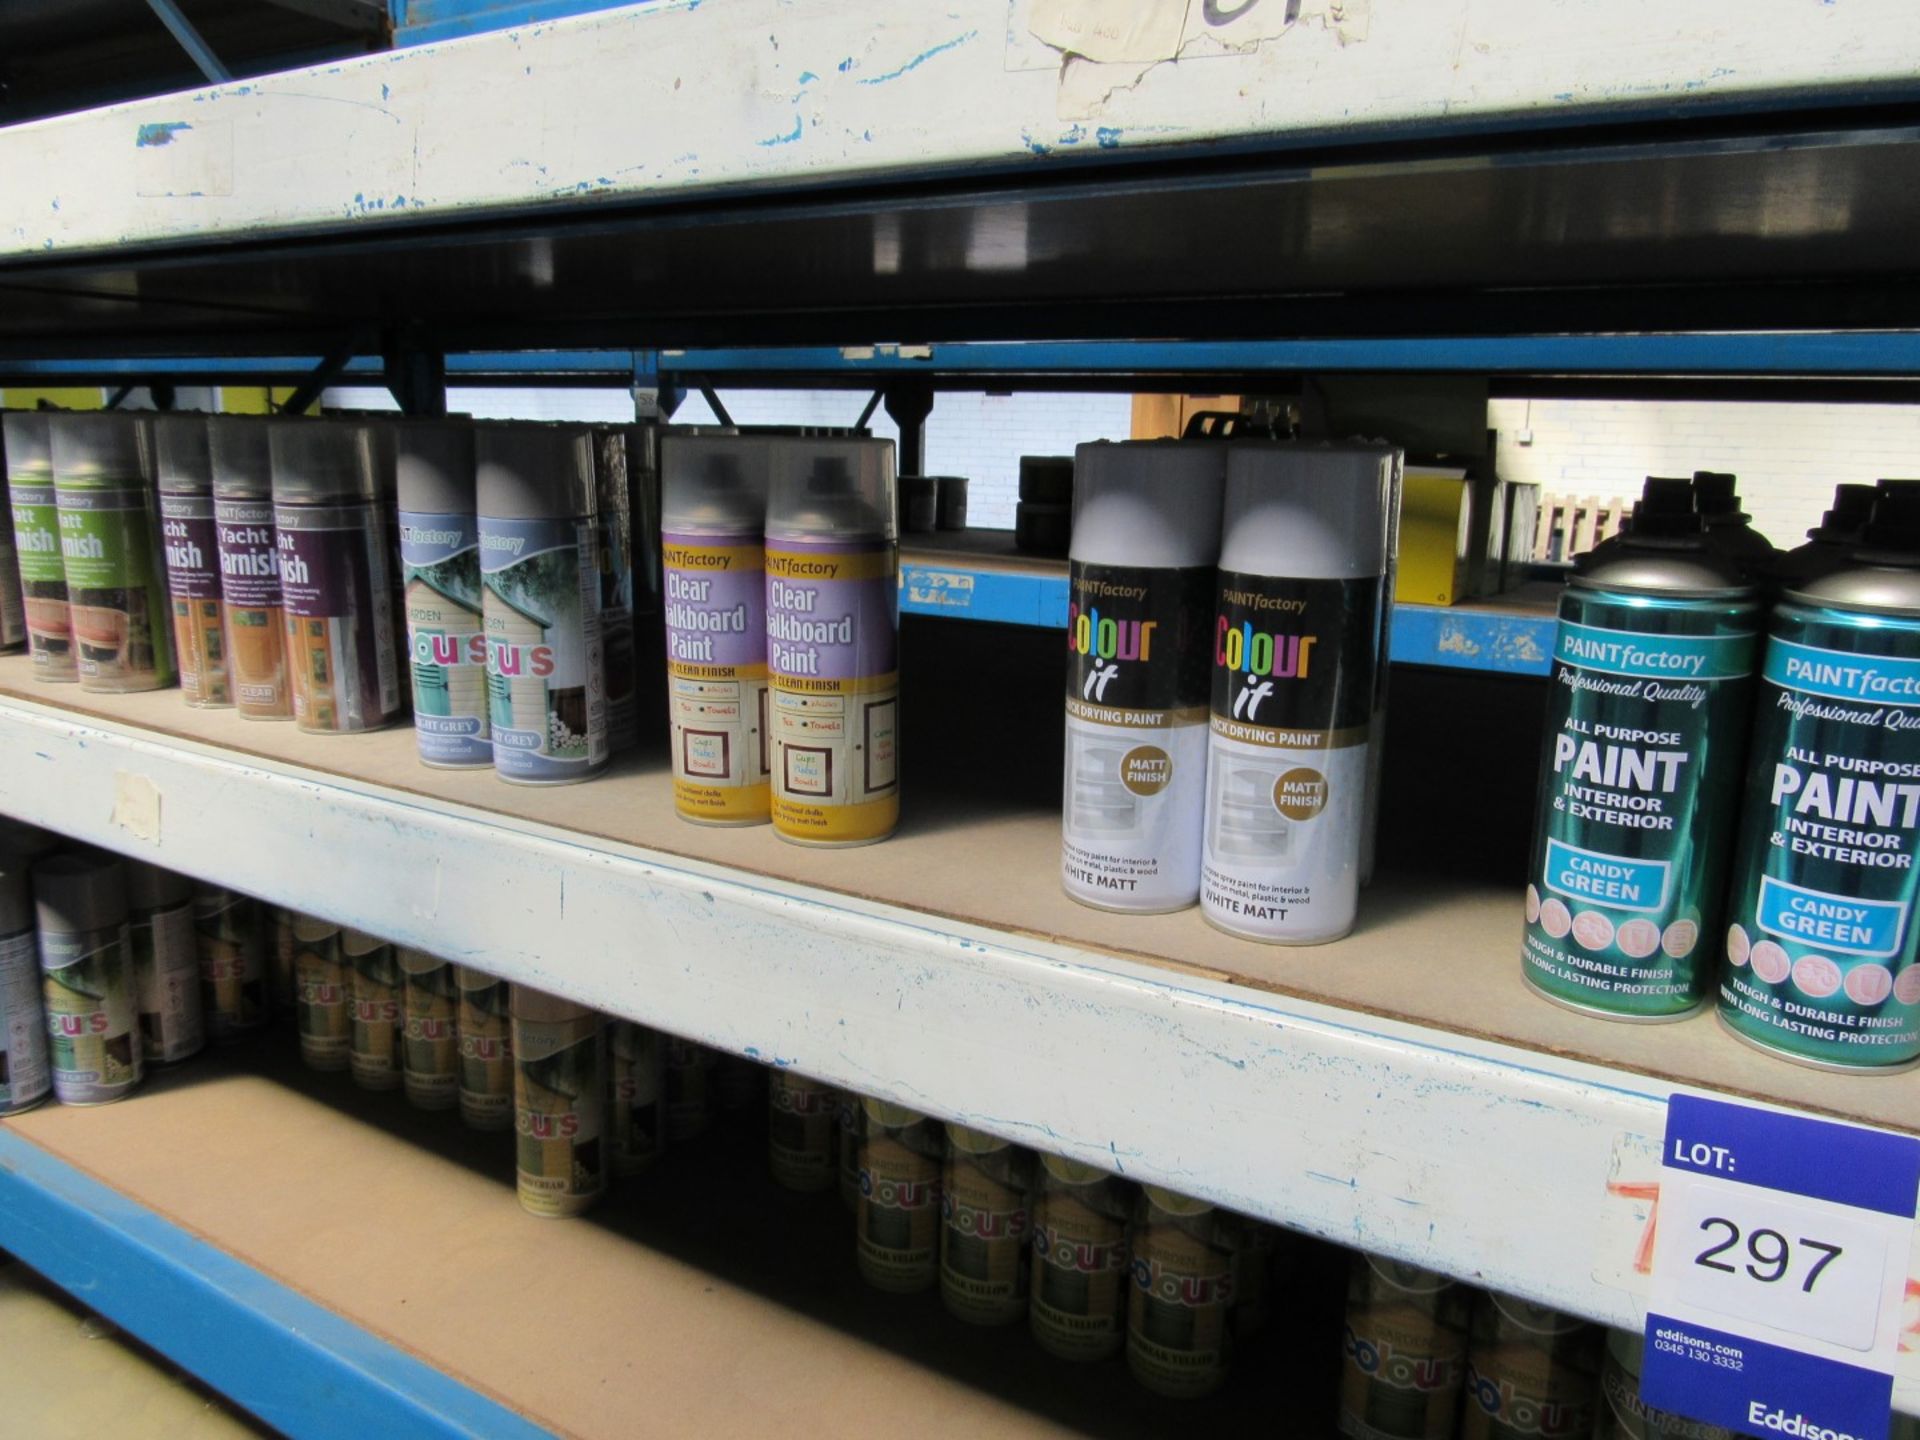 Contents of shelf to contain various paint factory aerosol spray paints and varnishes - Image 2 of 2